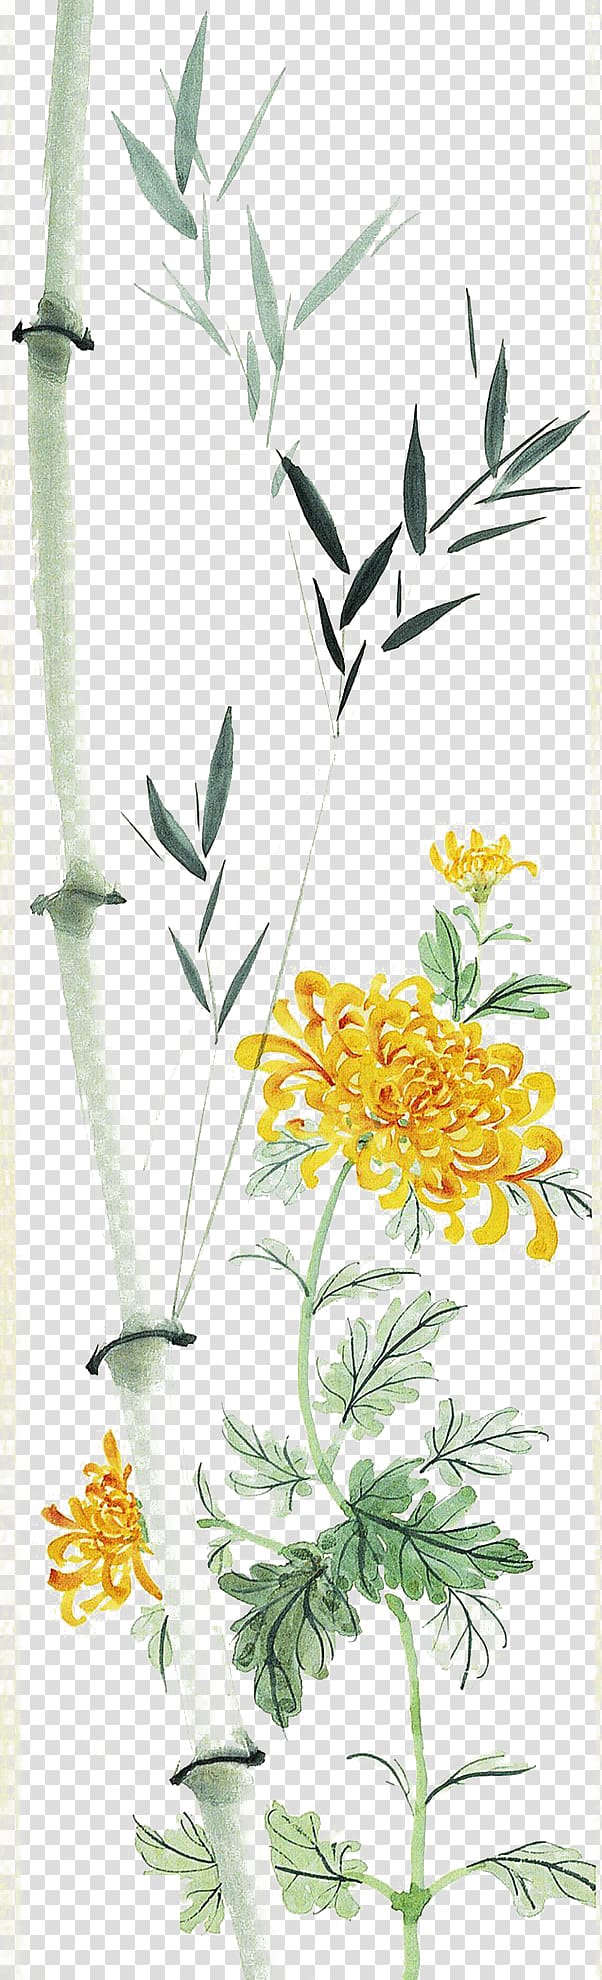 Chrysanthemum Bamboo Chinese painting Leaf, Bamboo leaves and chrysanthemums, yellow petaled flower sketch transparent background PNG clipart